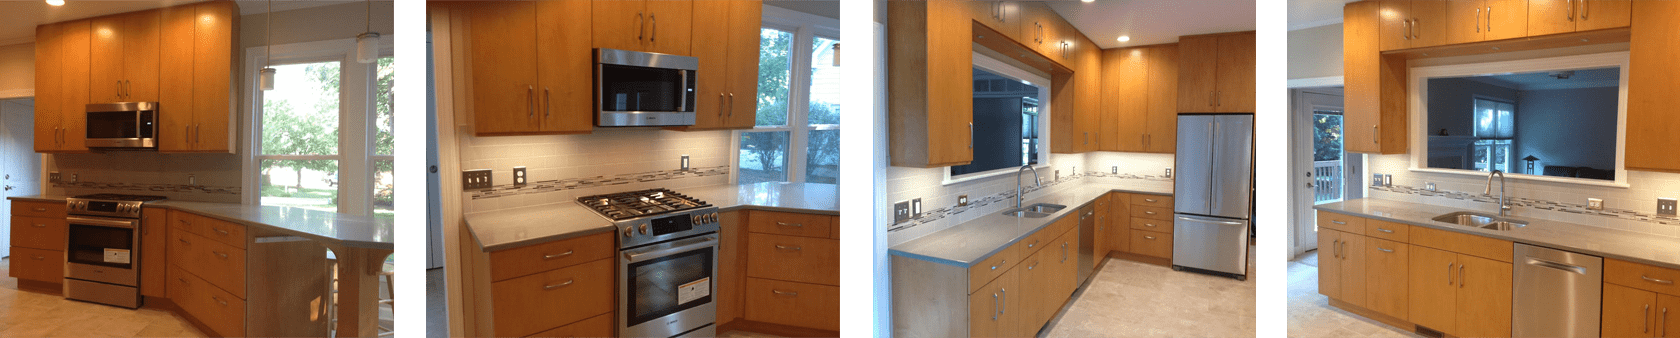 Fully Remodeled Cary Kitchen